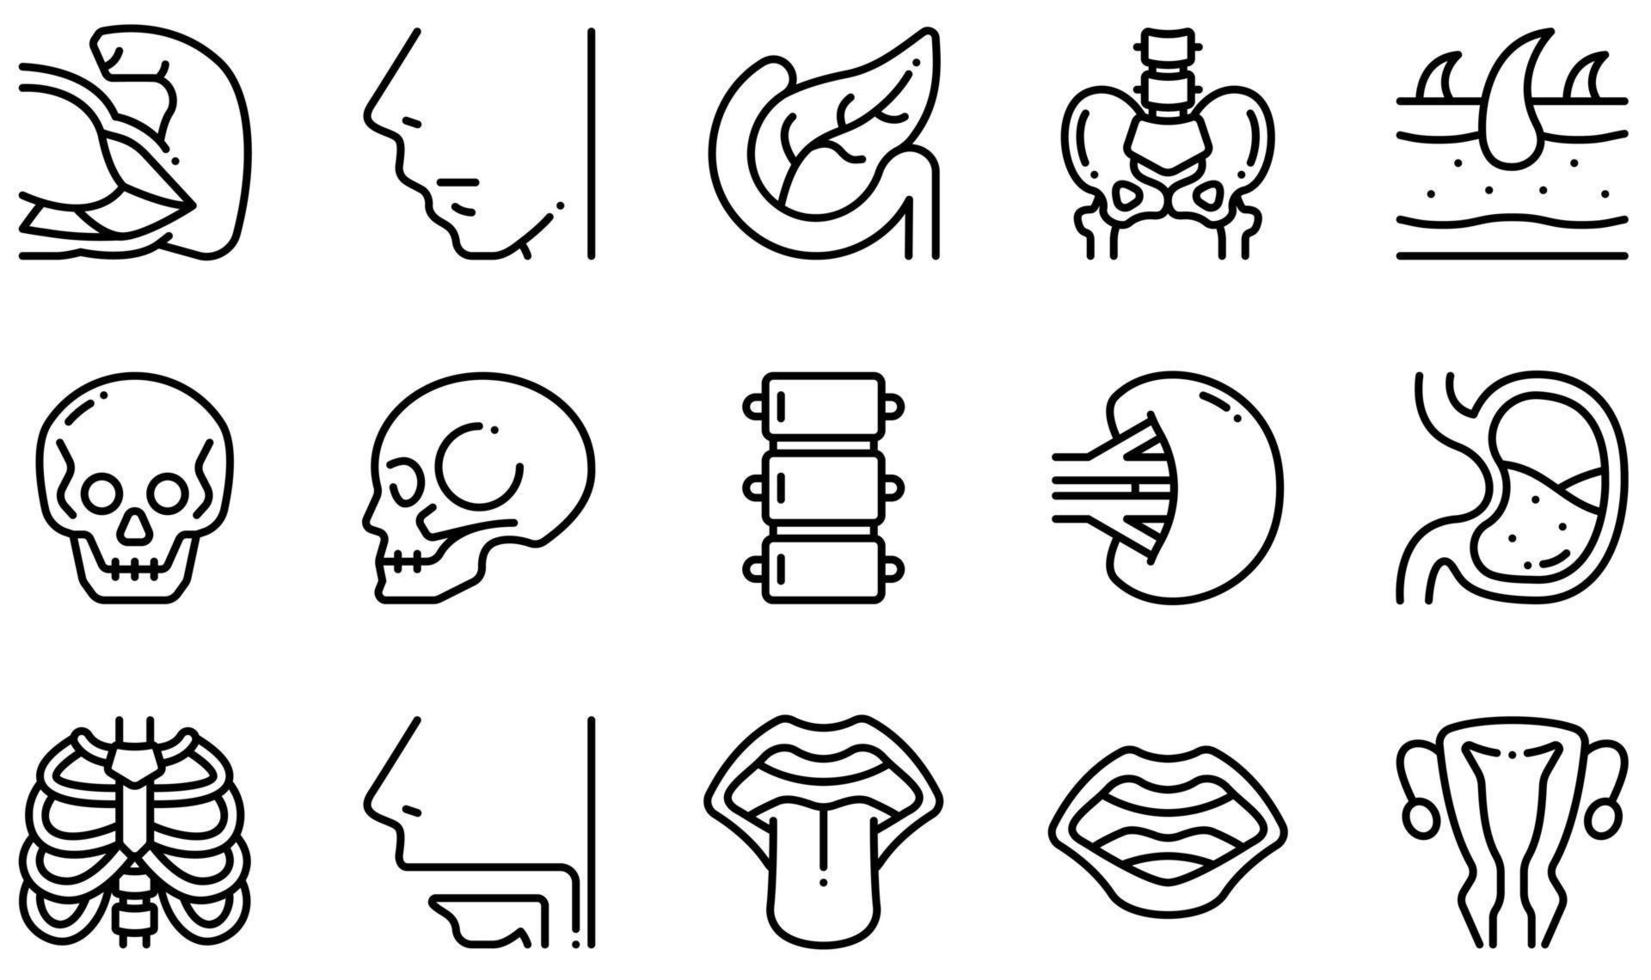 Set of Vector Icons Related to Human Body. Contains such Icons as Muscle, Nose, Pancreas, Pelvis, Skull, Skin and more.